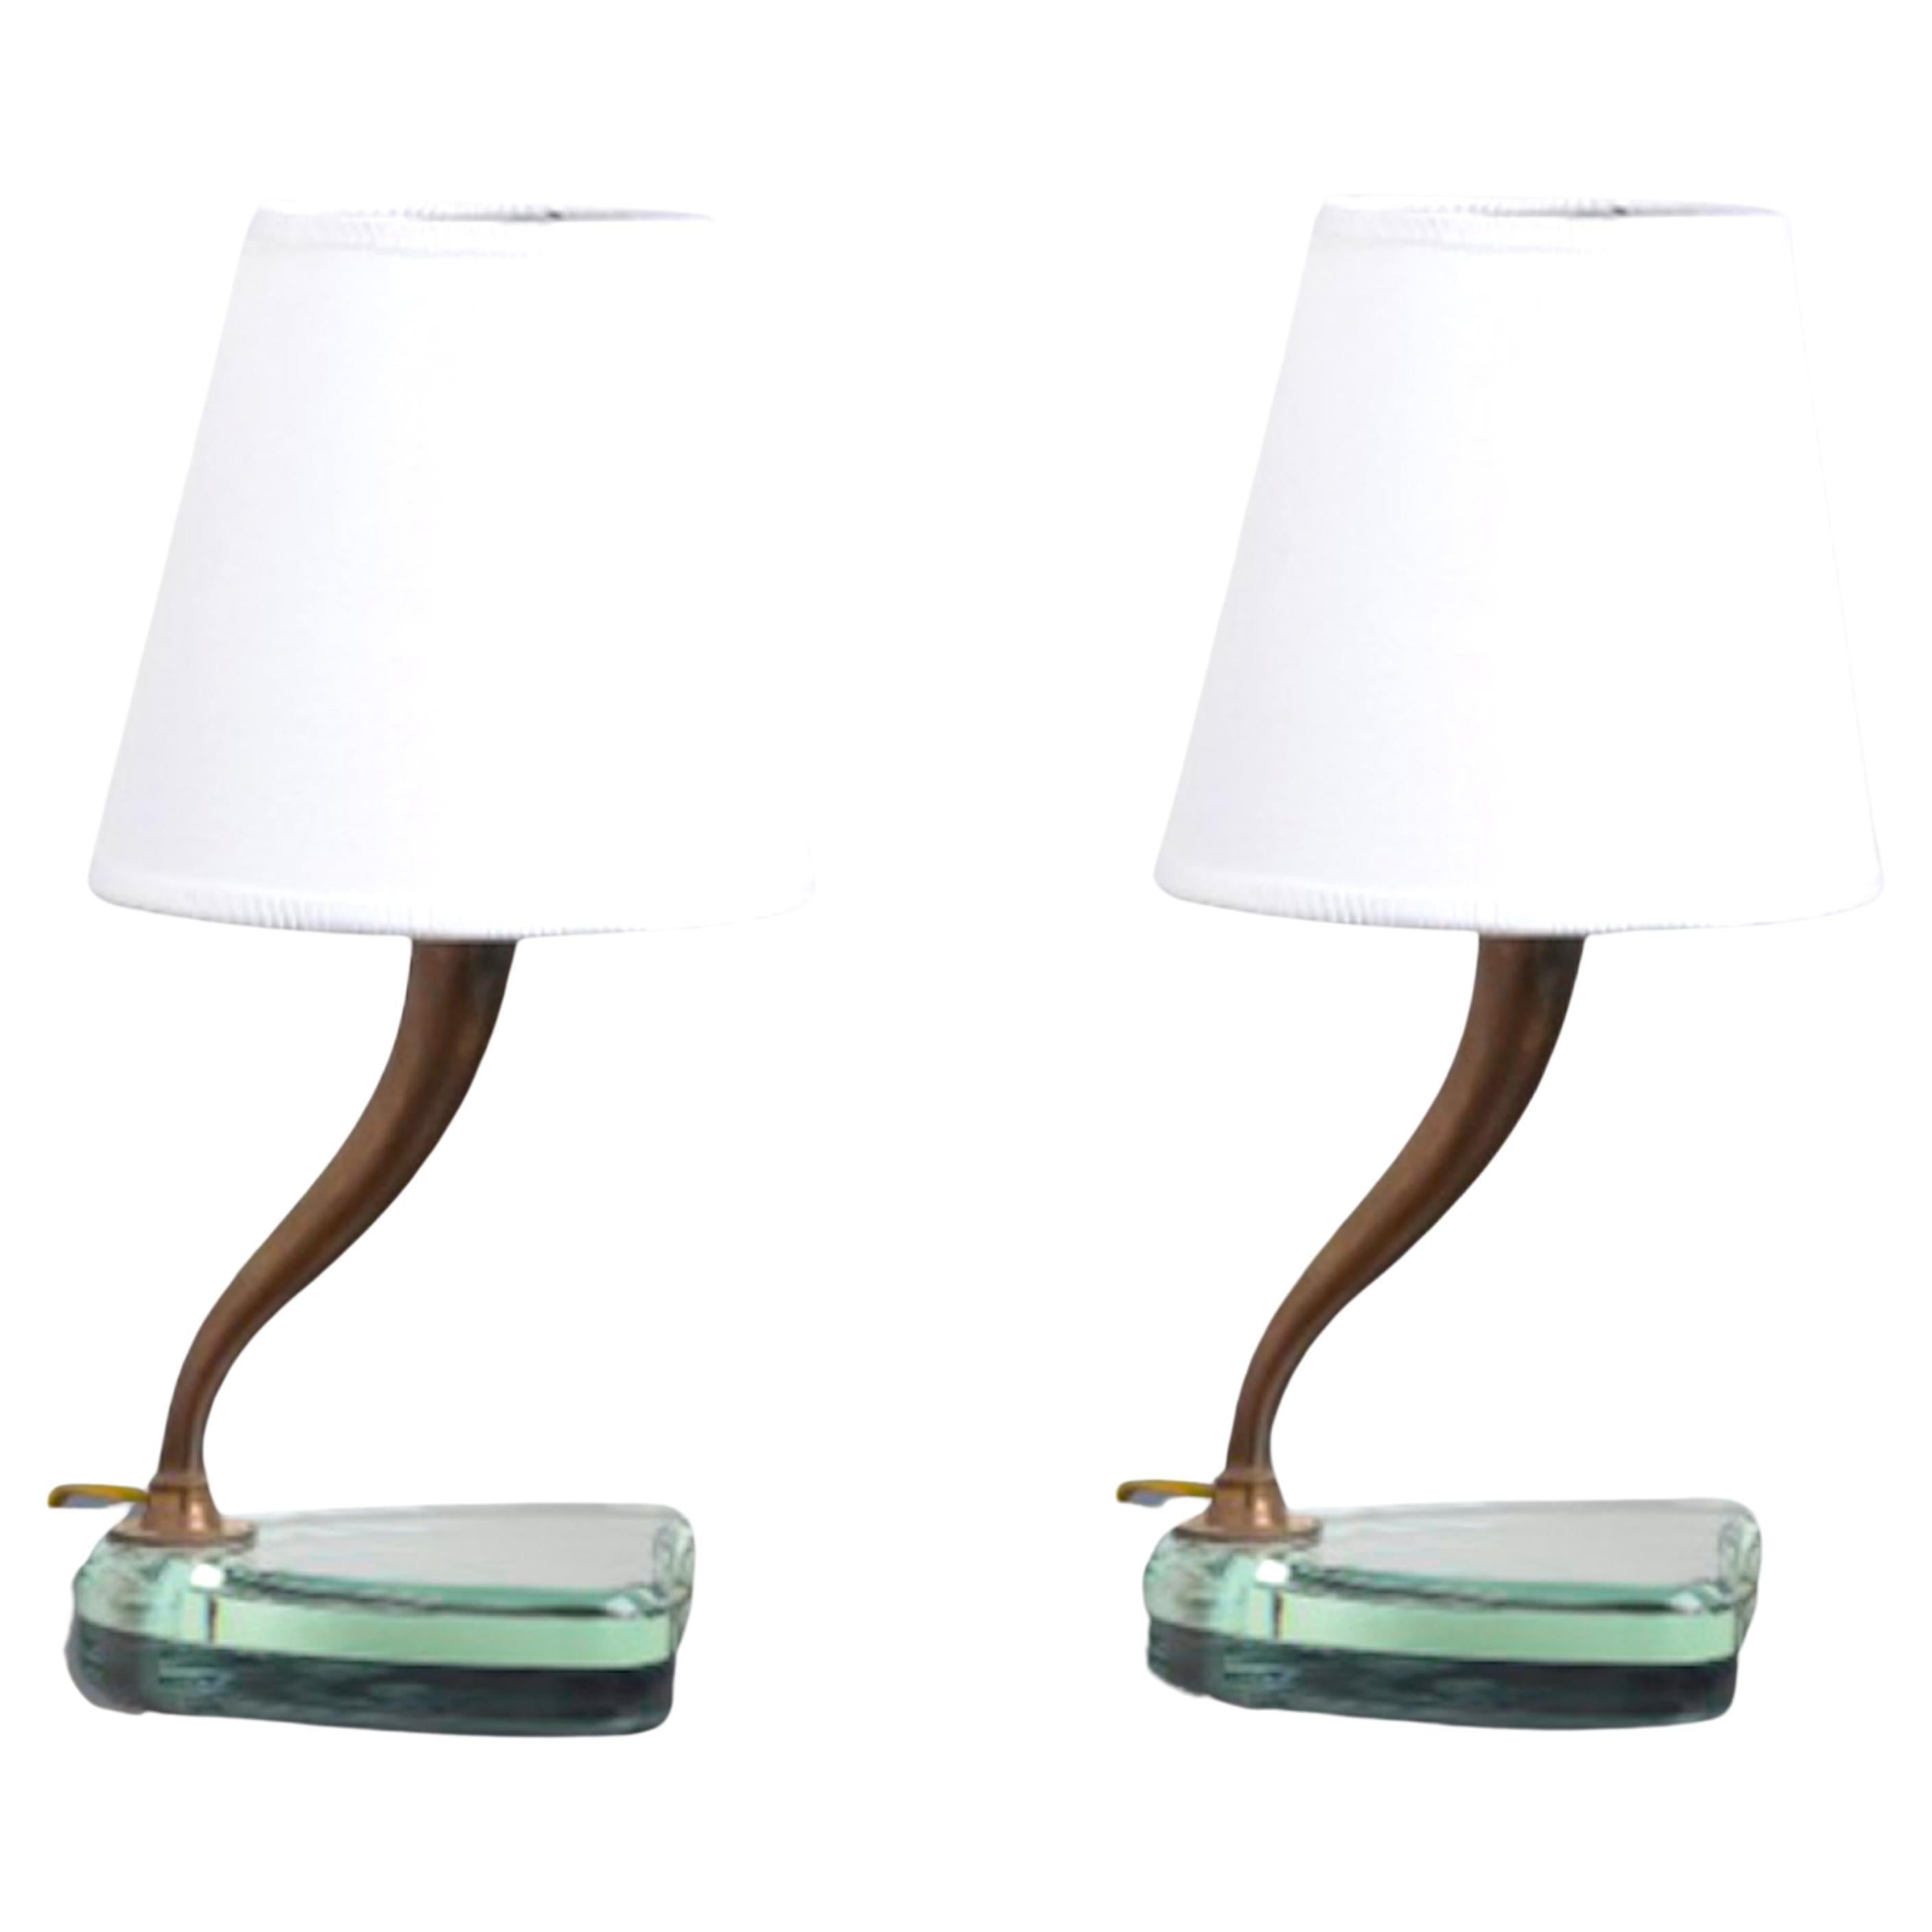 Pair of Table Lamps by Emilio Lancia, Crystal and Brass, Italy 1930s For Sale